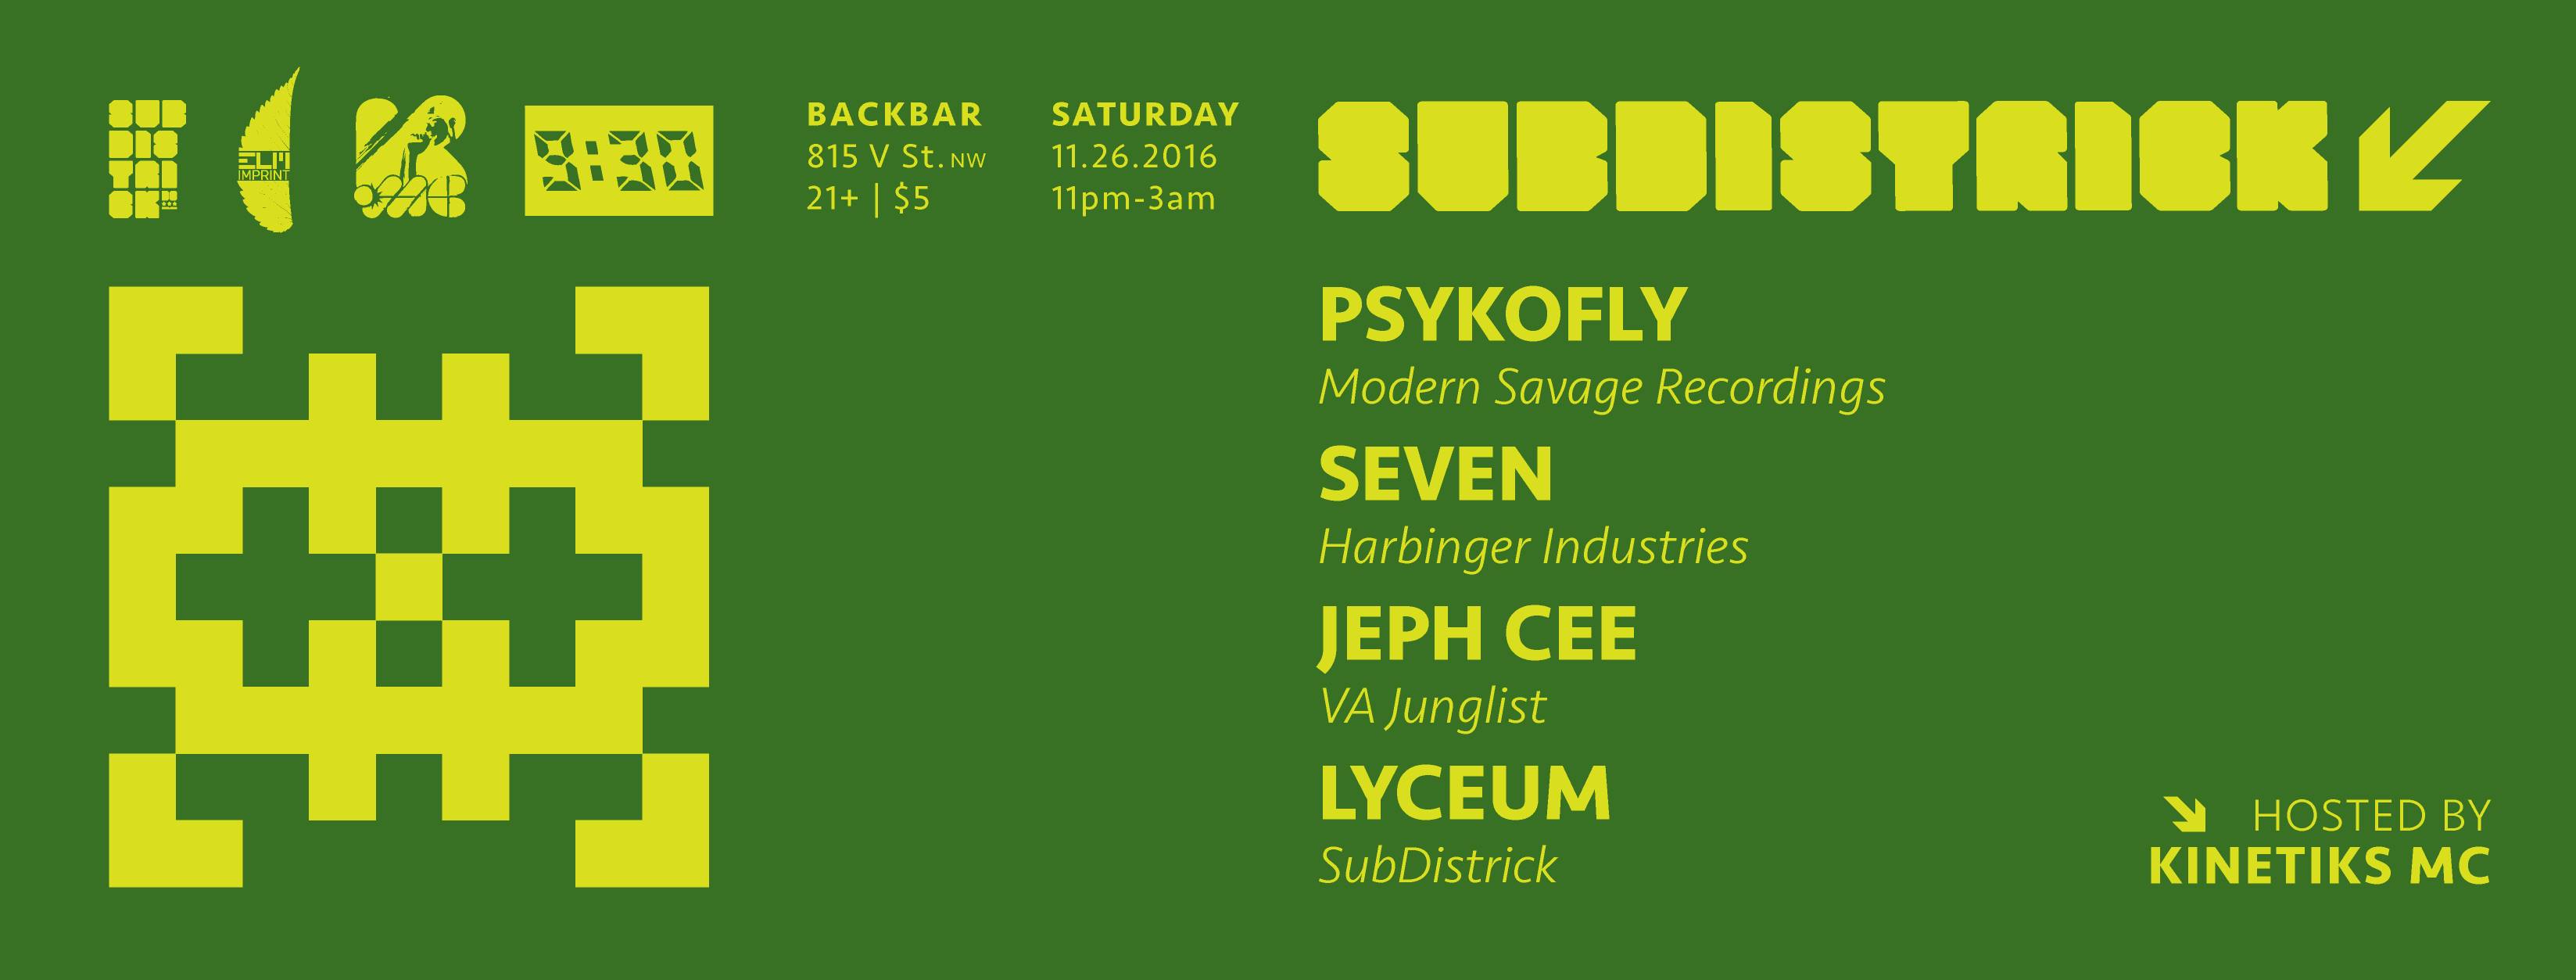 SubDistrick! - November 2016 featuring Lyceum, Psykofly, & DJ Seven! Hosted by Kinetiks MC [10.29.16]